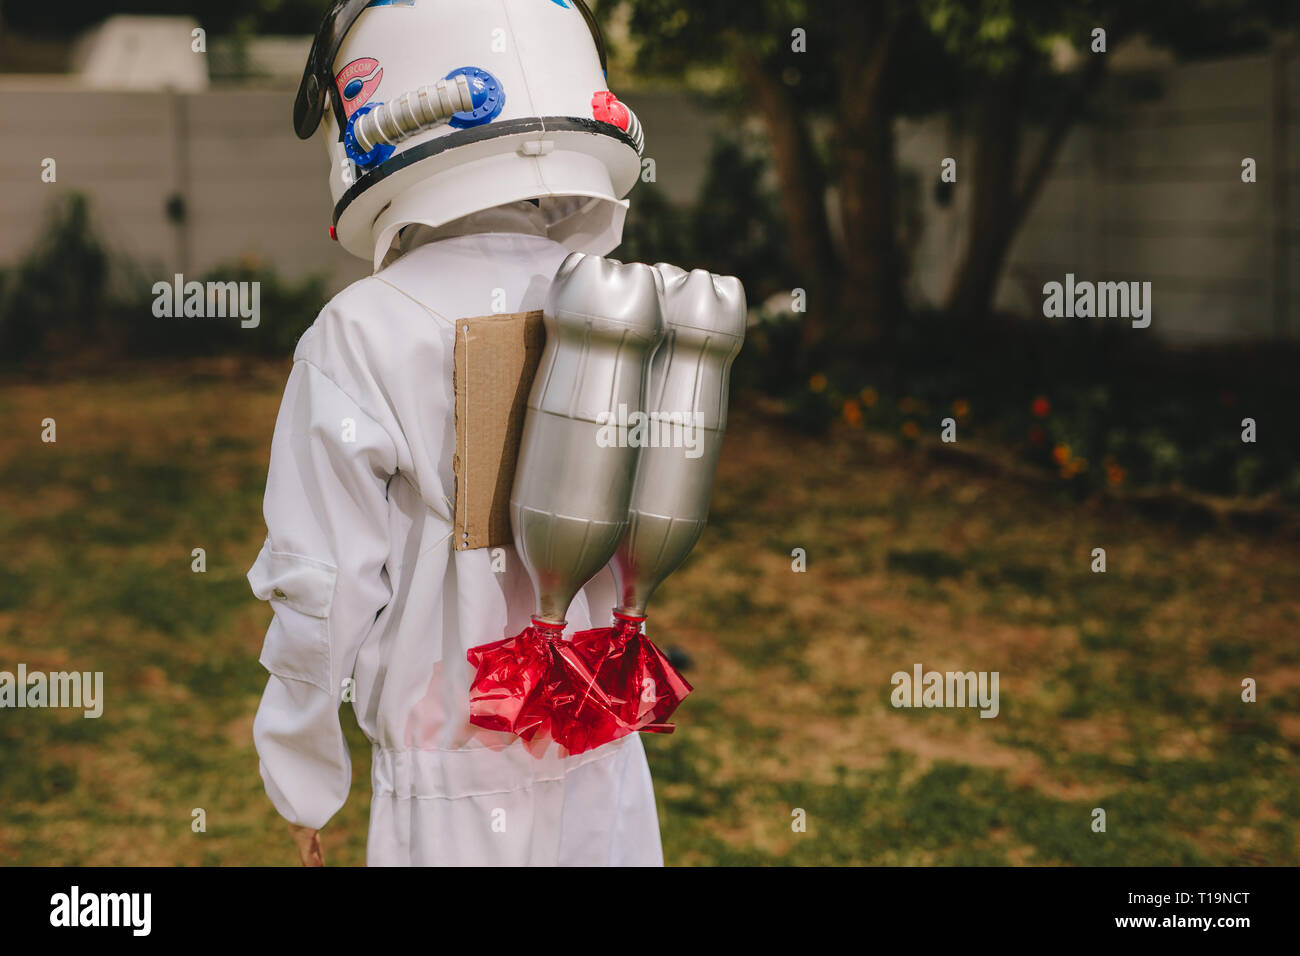 Rear view of boy in space helmet and suit carrying a toy jetpack on his back. Boy pretending to be an astronaut playing outdoors. Stock Photo